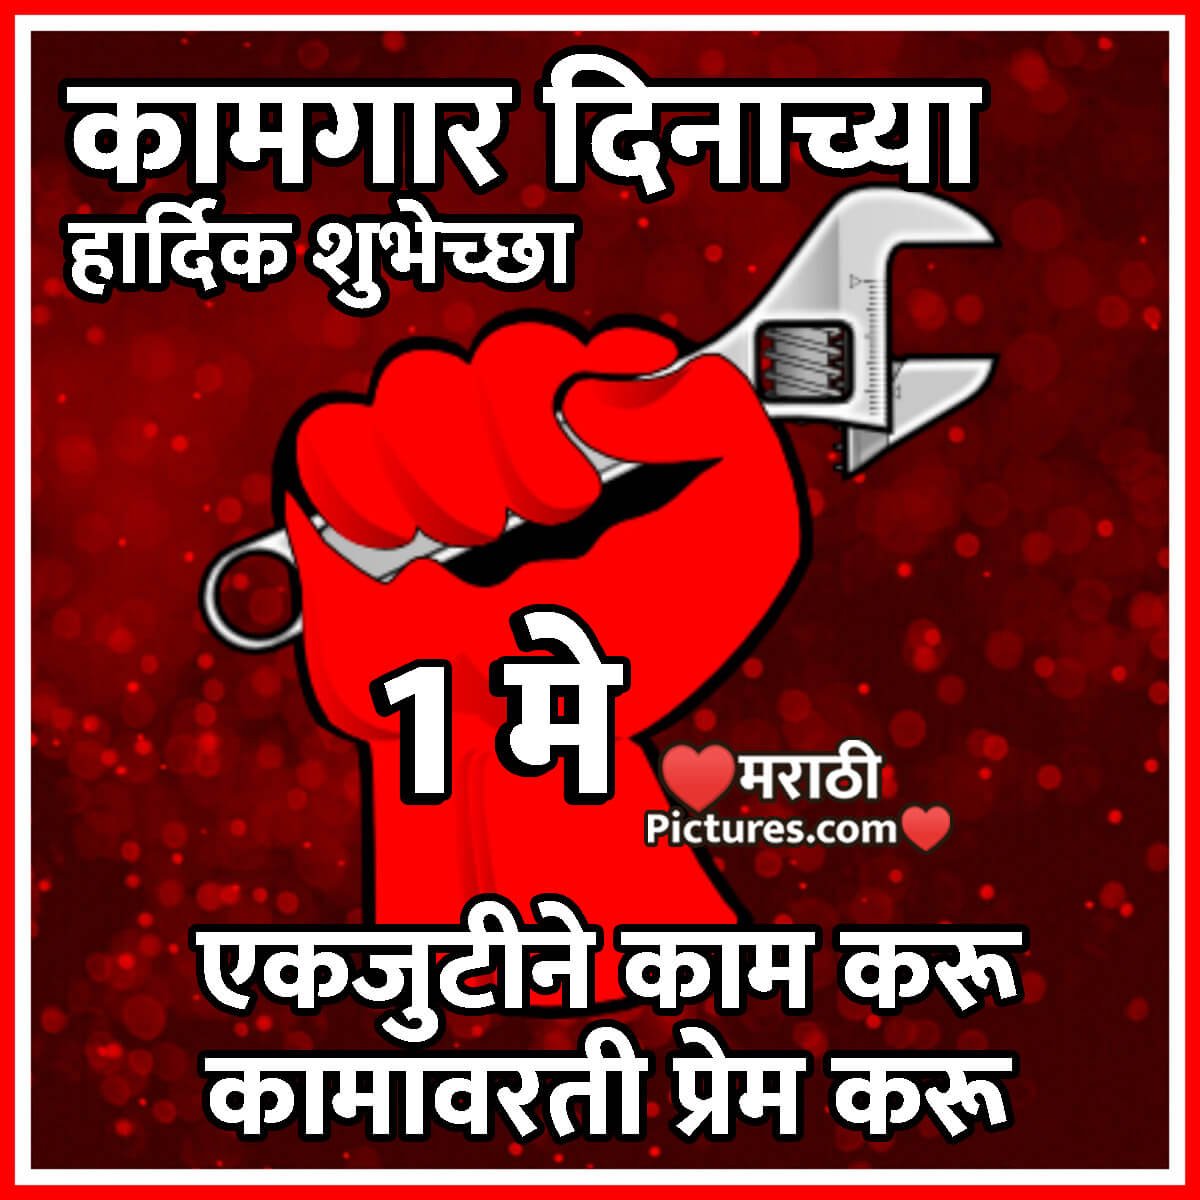 1 May Worker Day Wish Image